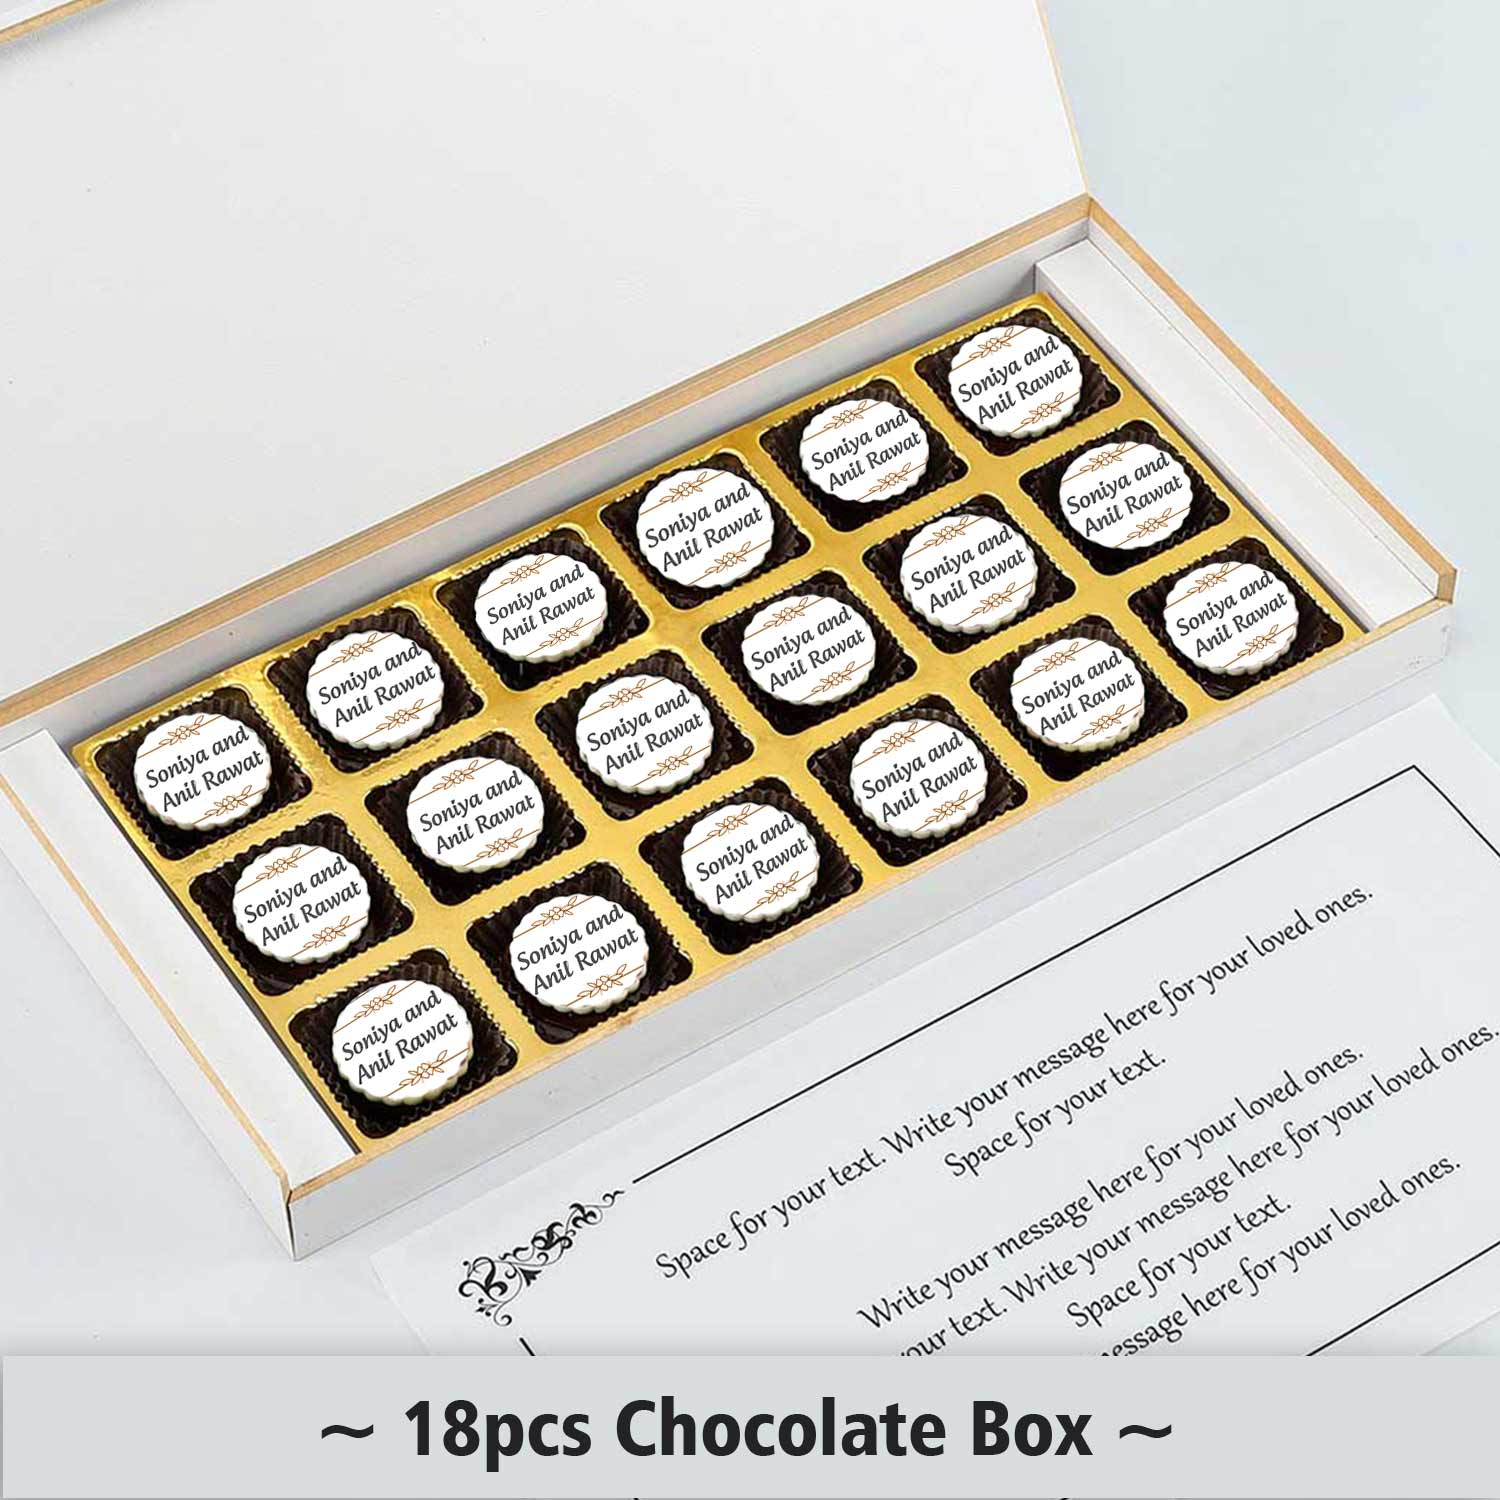 Personalised chocolates to celebrate the togetherness